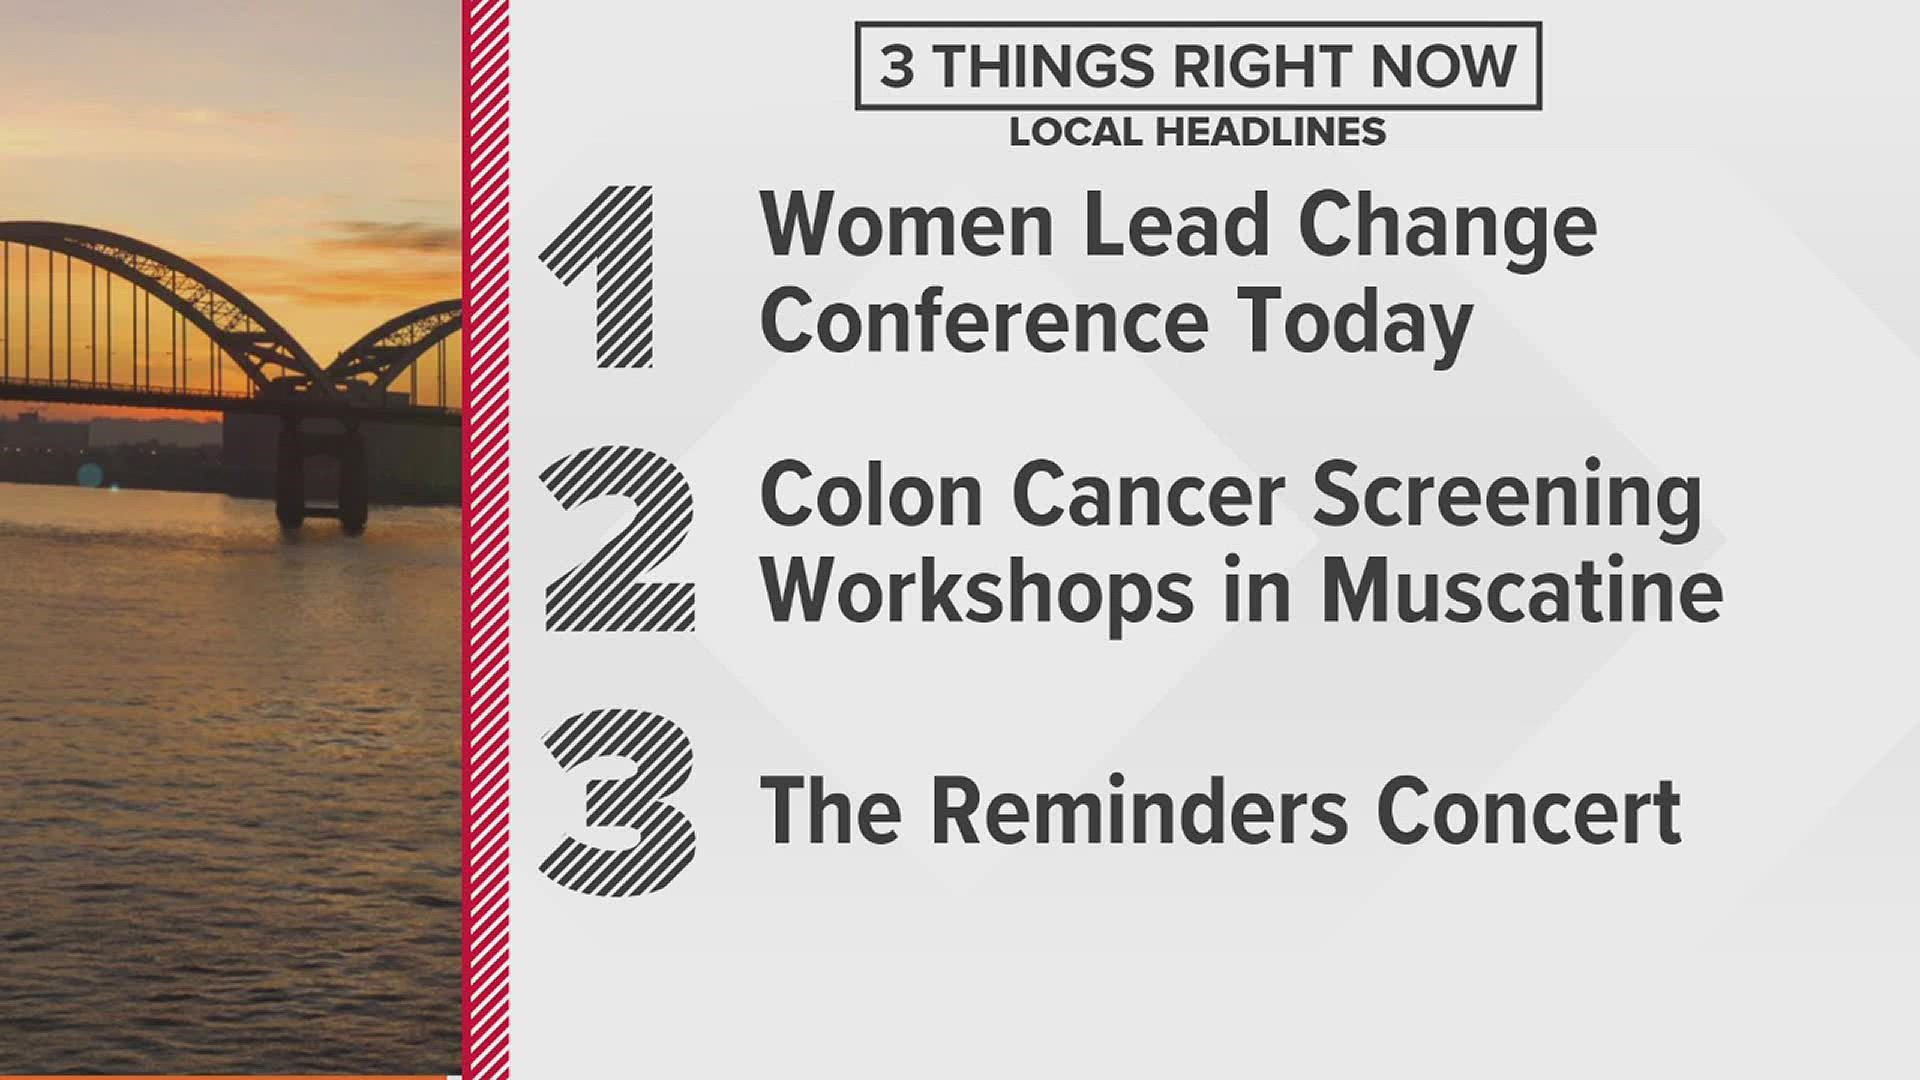 Women Lead Change conference happening today in the Quad Cities, Muscatine Community College hosts colon screening and The Reminders play in LeClaire tonight.